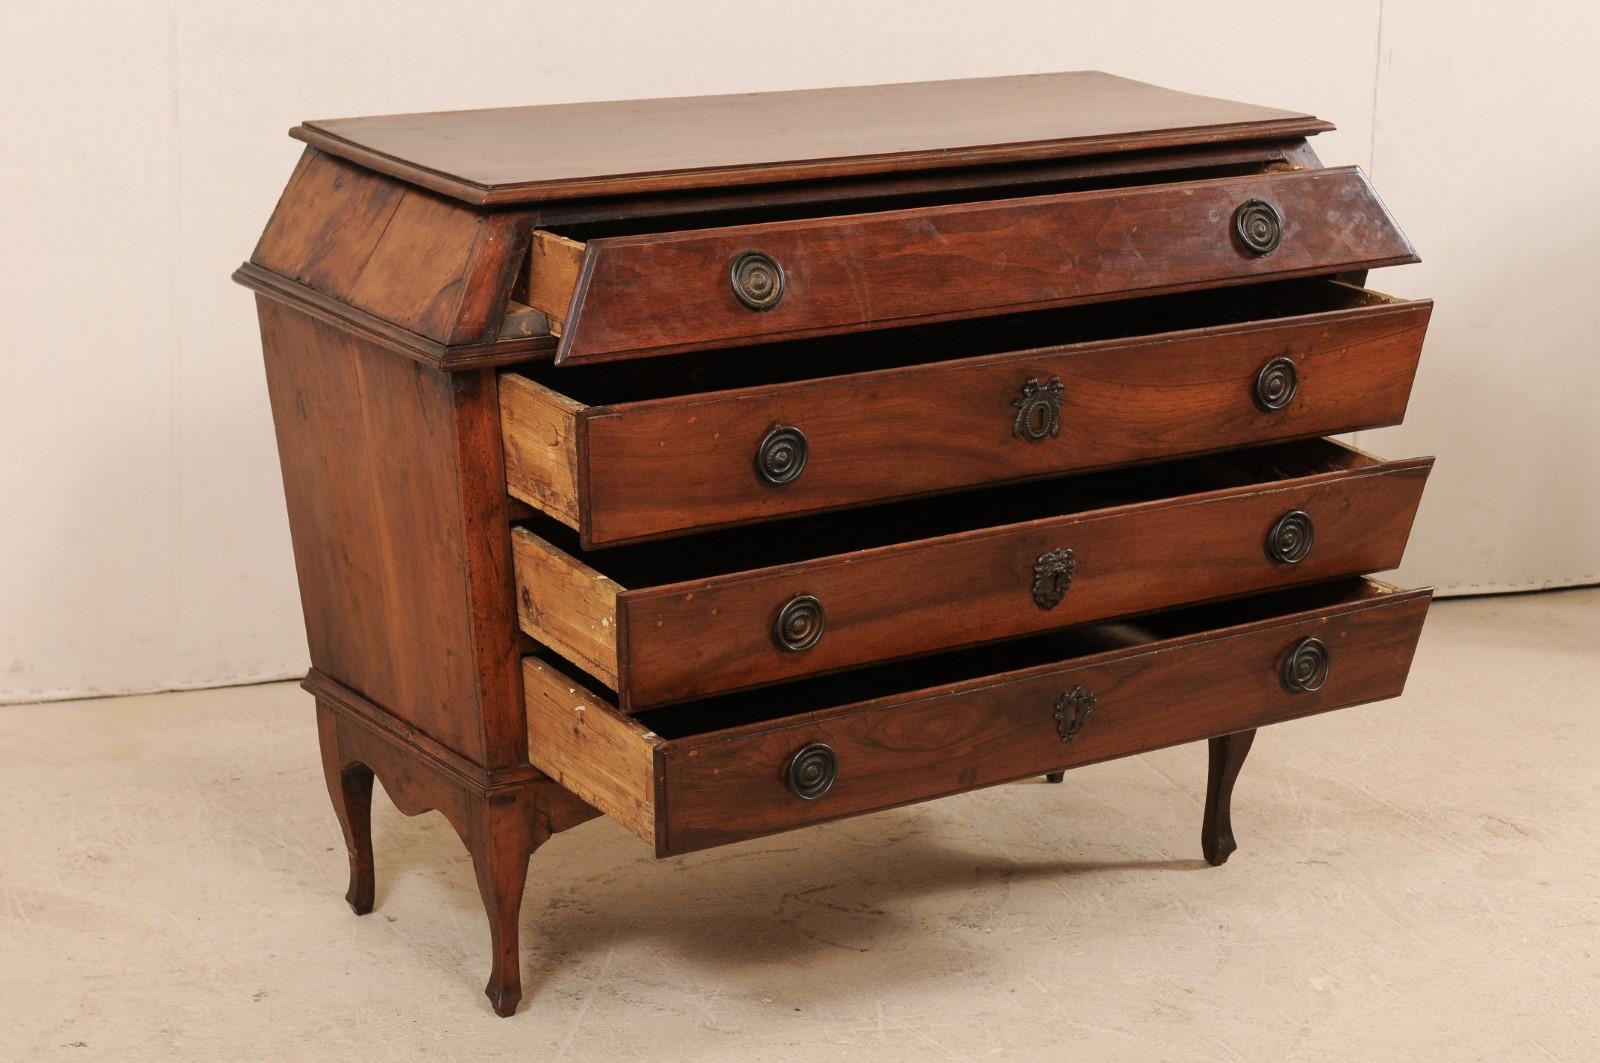 An Exceptional Late 18th C. Italian Walnut Commode w/ Unique Triangulated Shape In Good Condition For Sale In Atlanta, GA